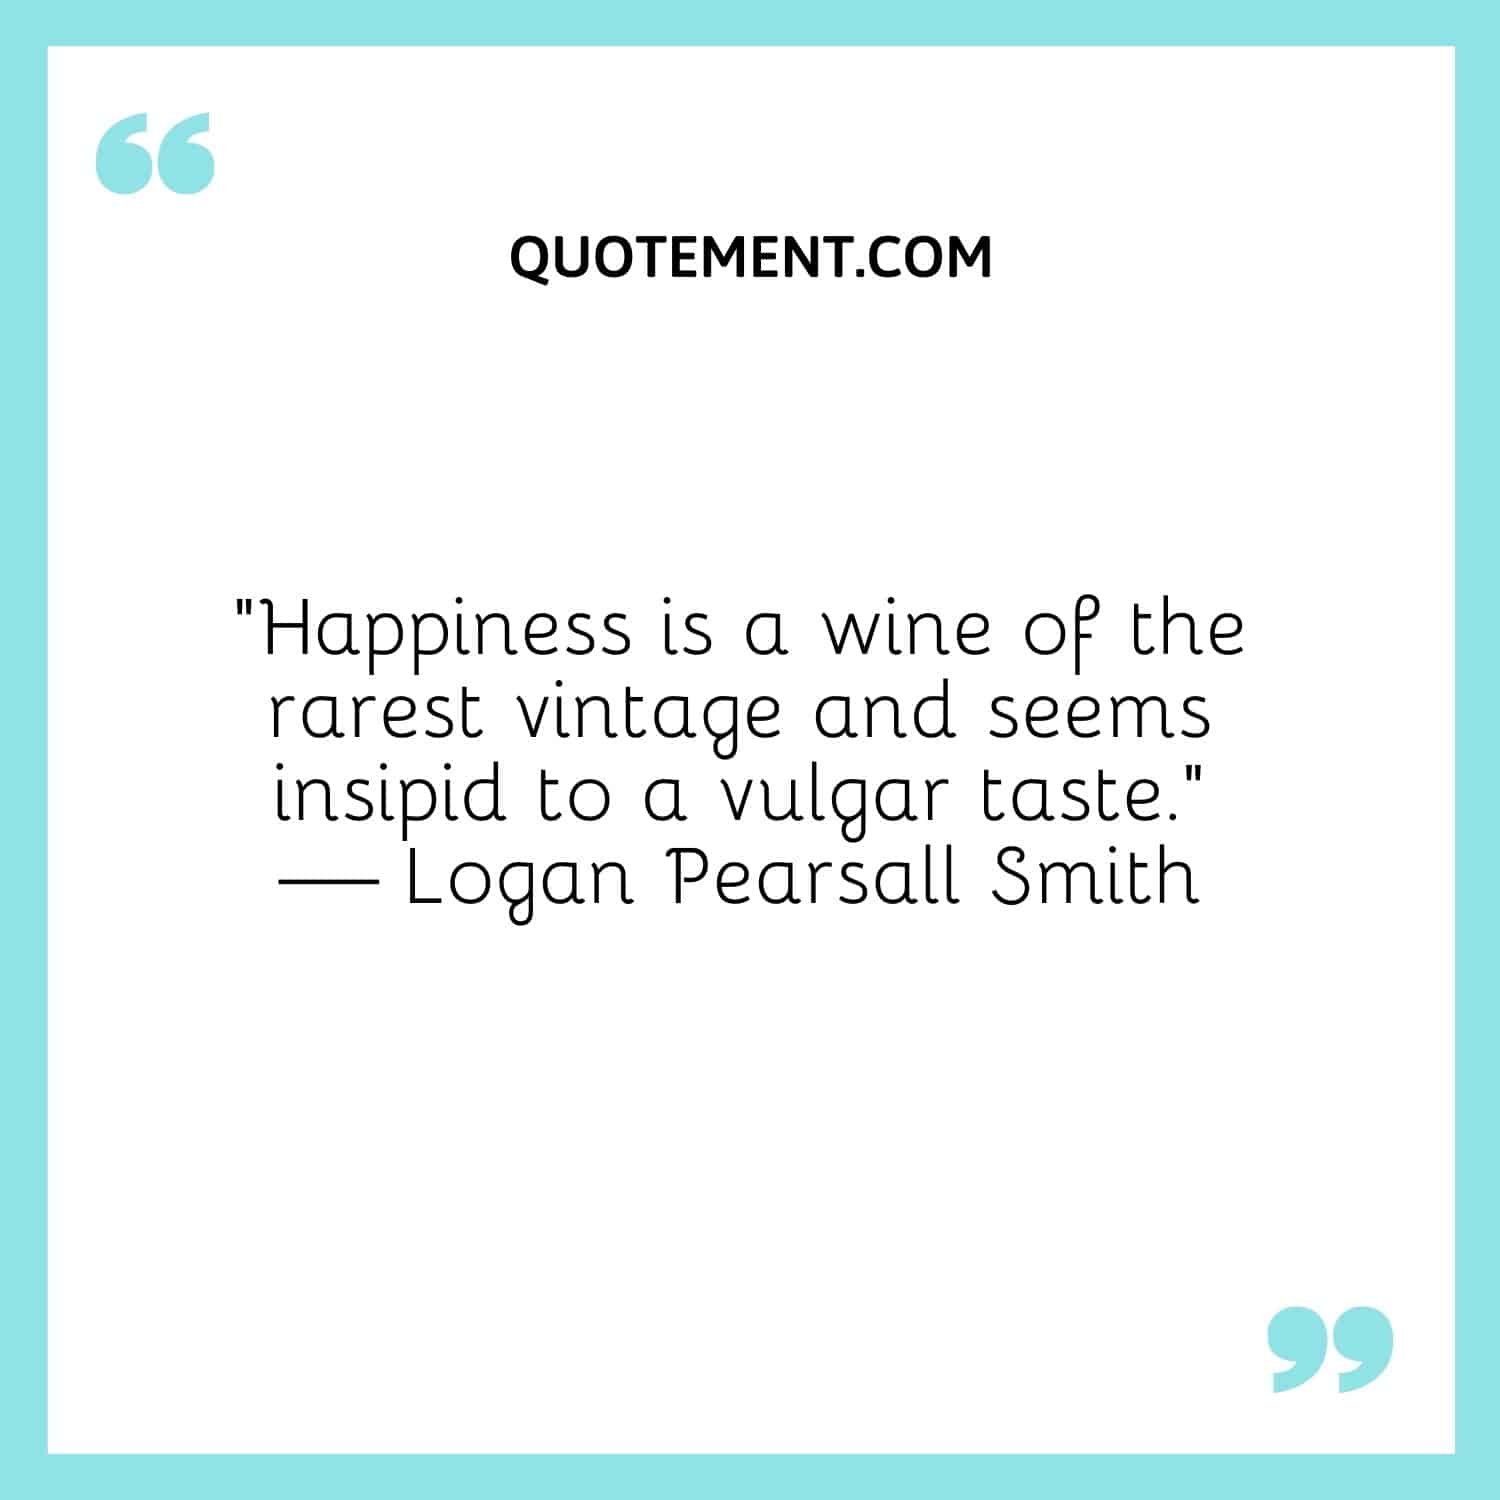 Happiness is a wine of the rarest vintage and seems insipid to a vulgar taste.